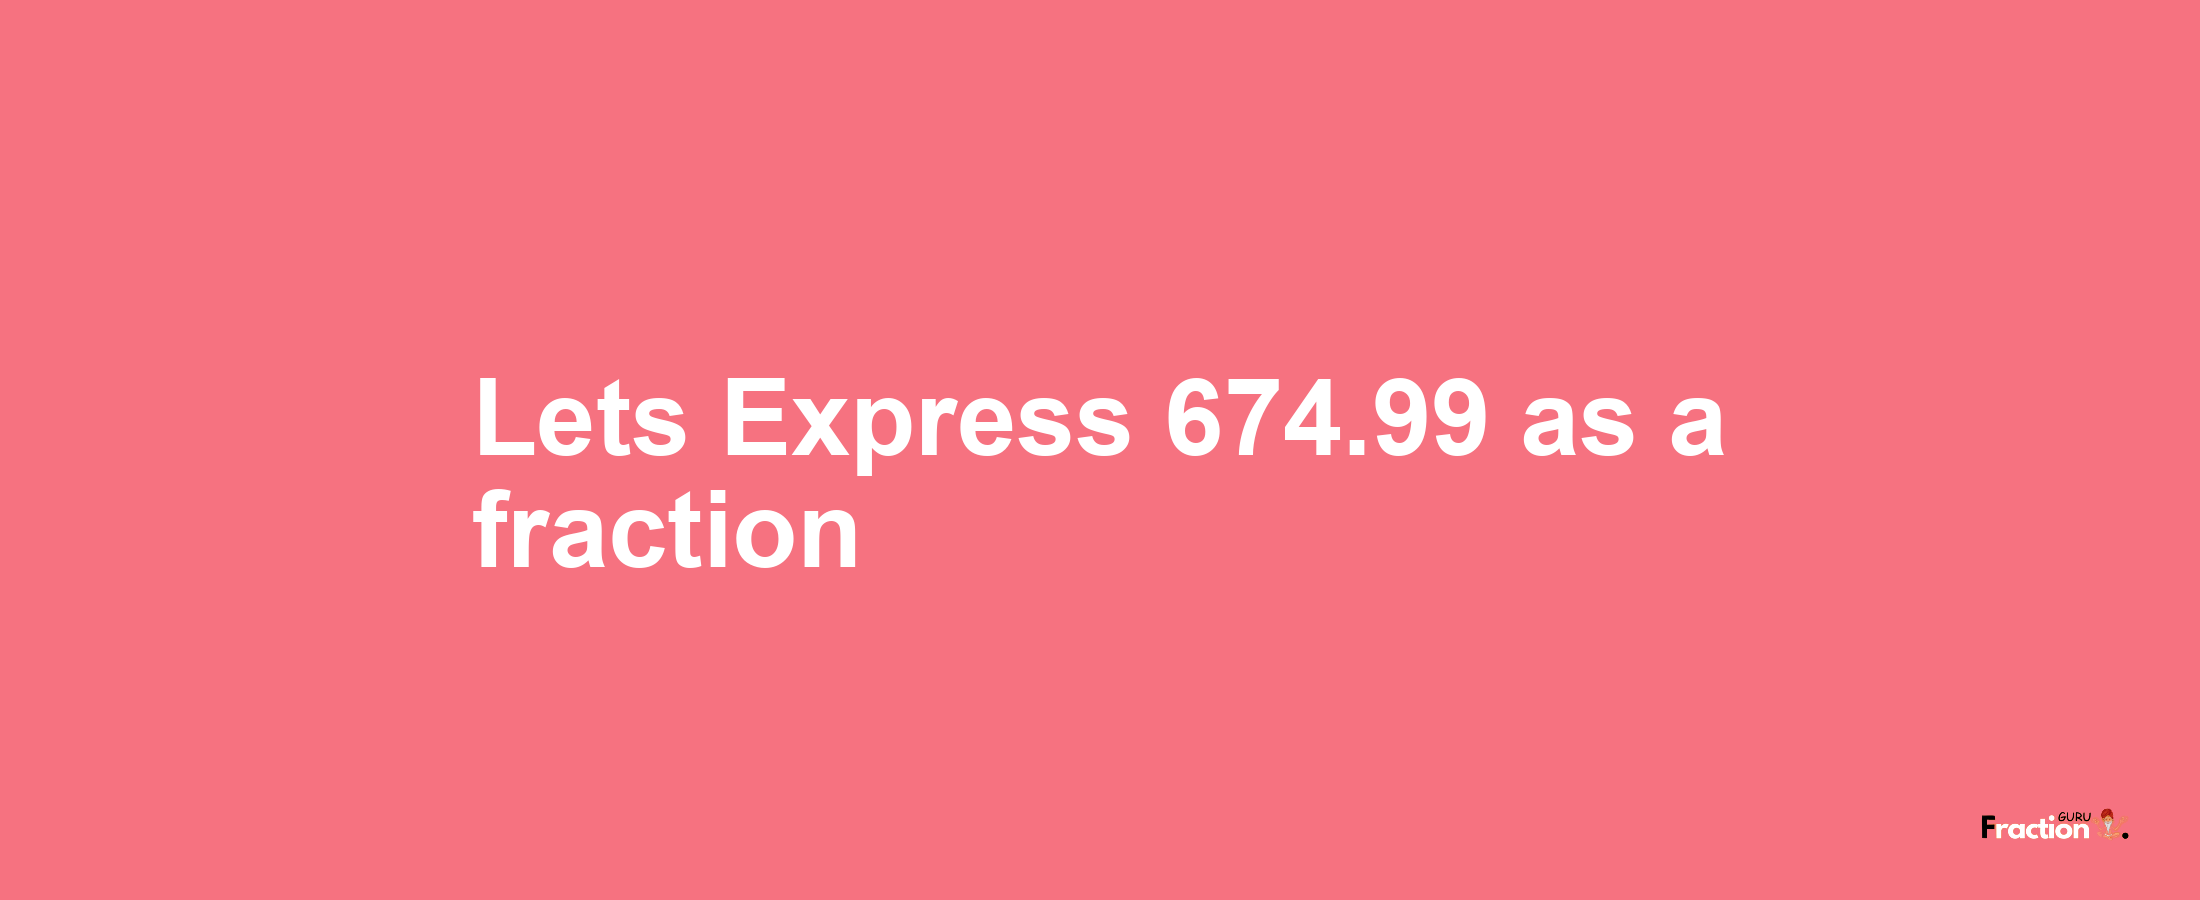 Lets Express 674.99 as afraction